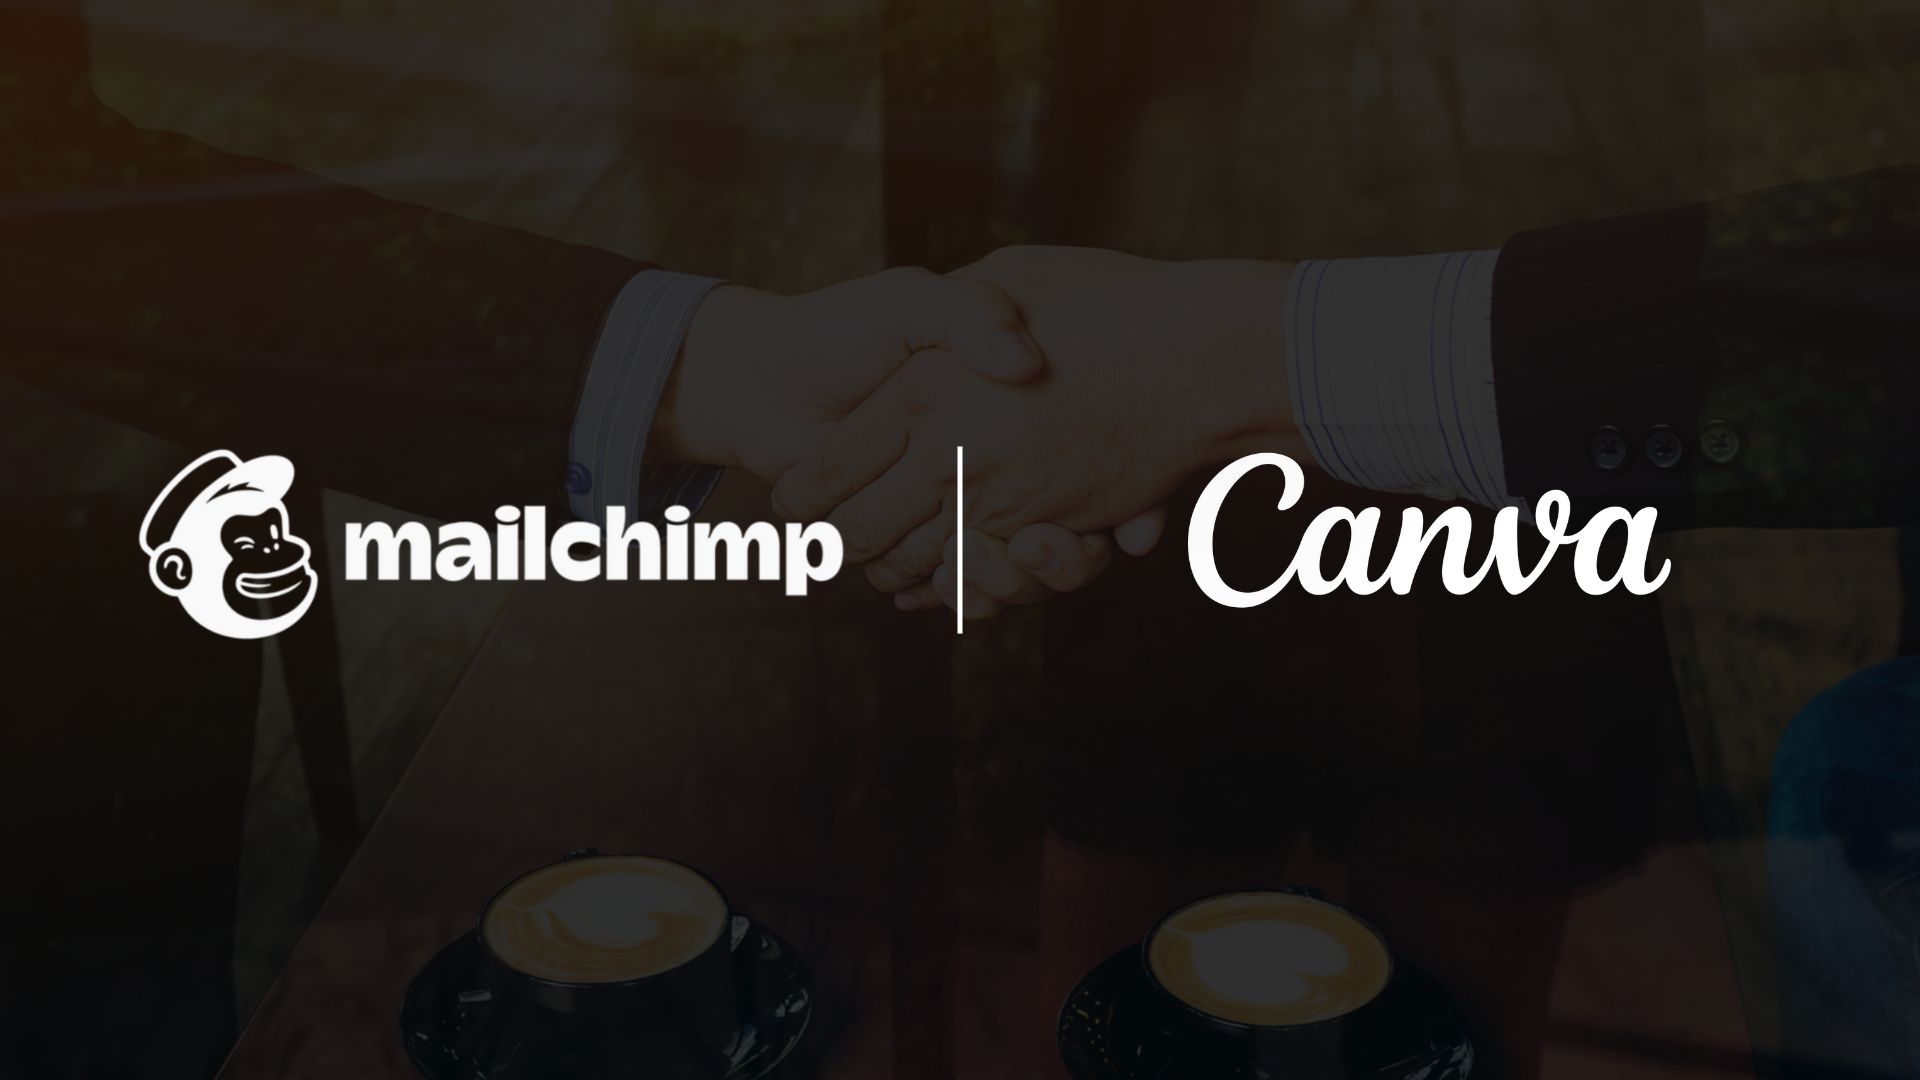 Mailchimp Unveils SMS Functionality and Expanded Canva Integration at Australian Flagship Event